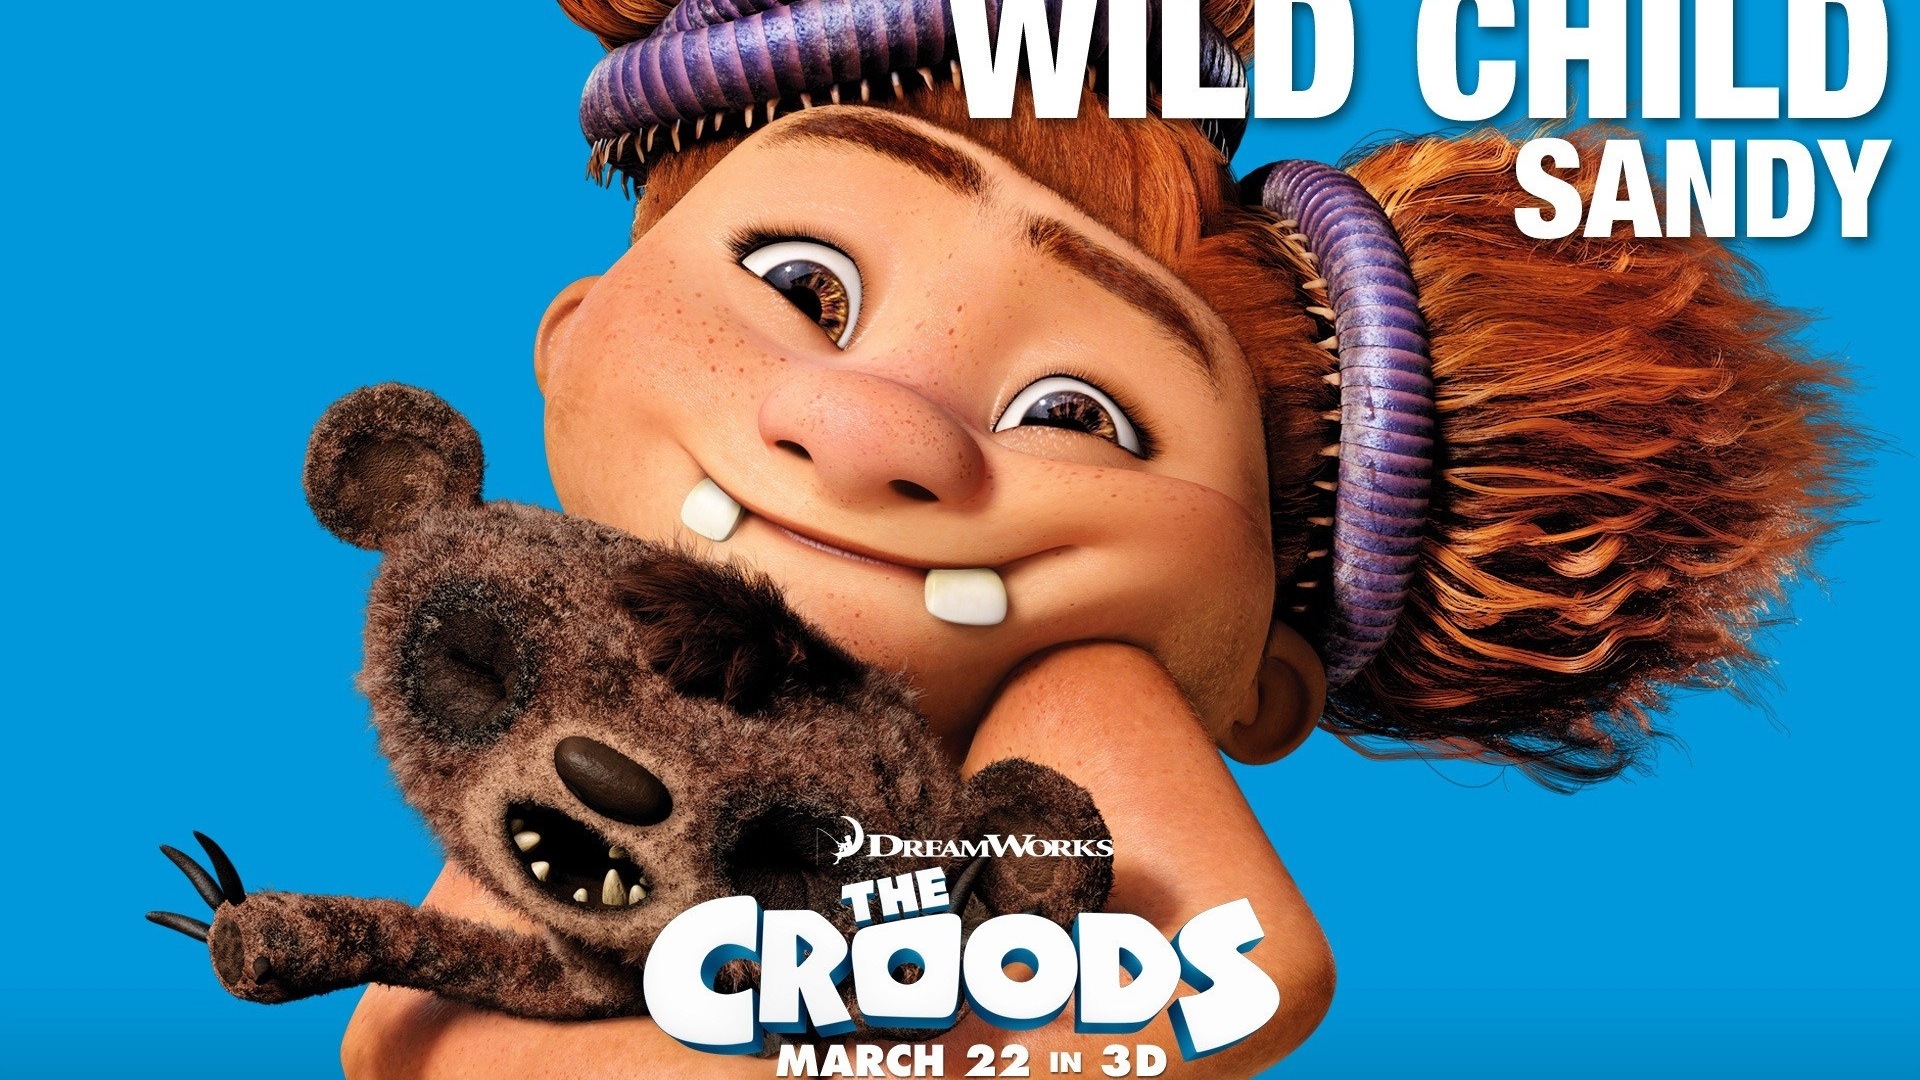 The Croods HD movie wallpapers #9 - 1920x1080